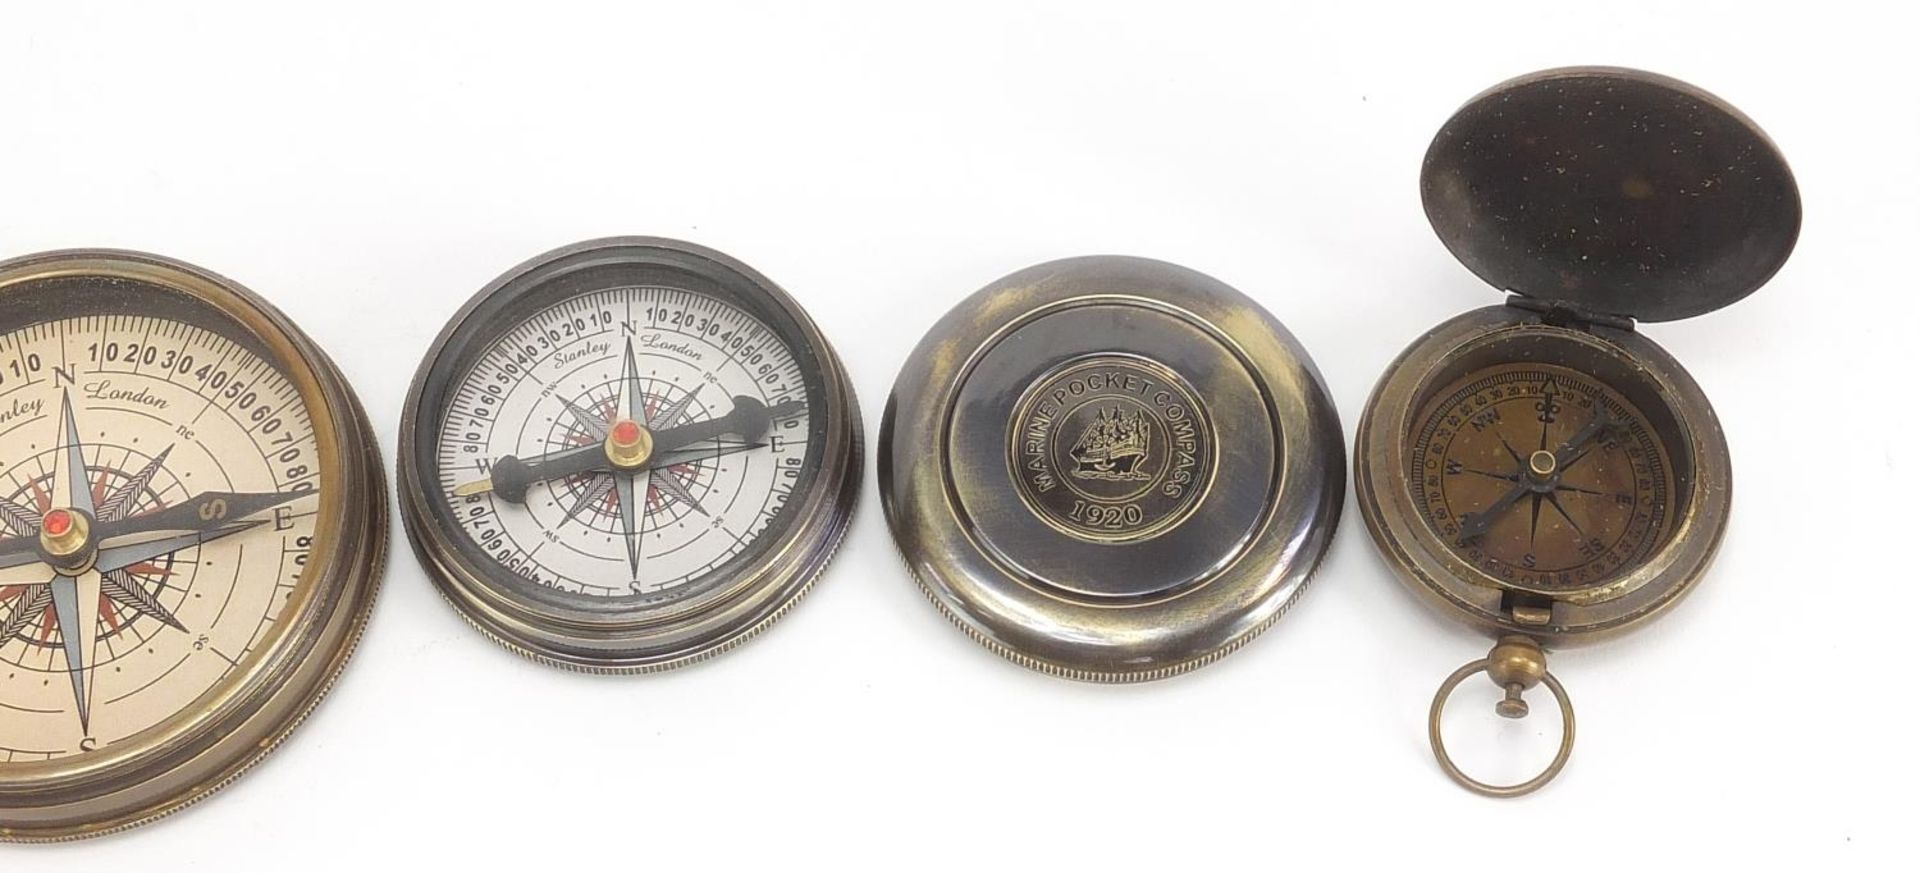 Four brass nautical interest compasses and sun dials, the largest 7.5cm in diameter - Image 3 of 5